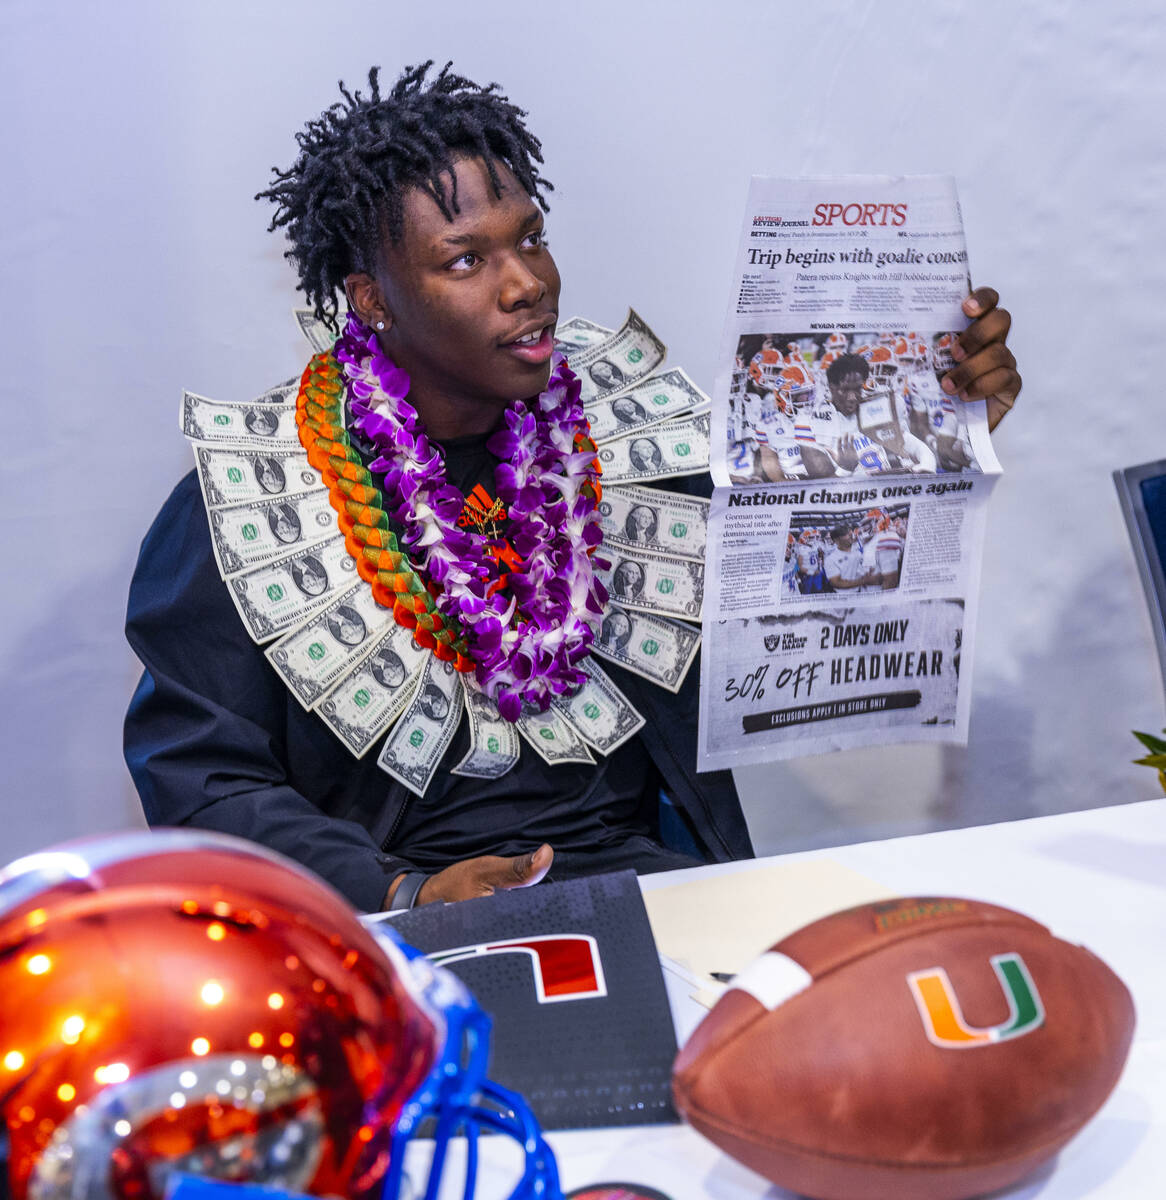 Bishop Gorman player Elijah Lofton with a commitment letter to the University of Miami holds up ...